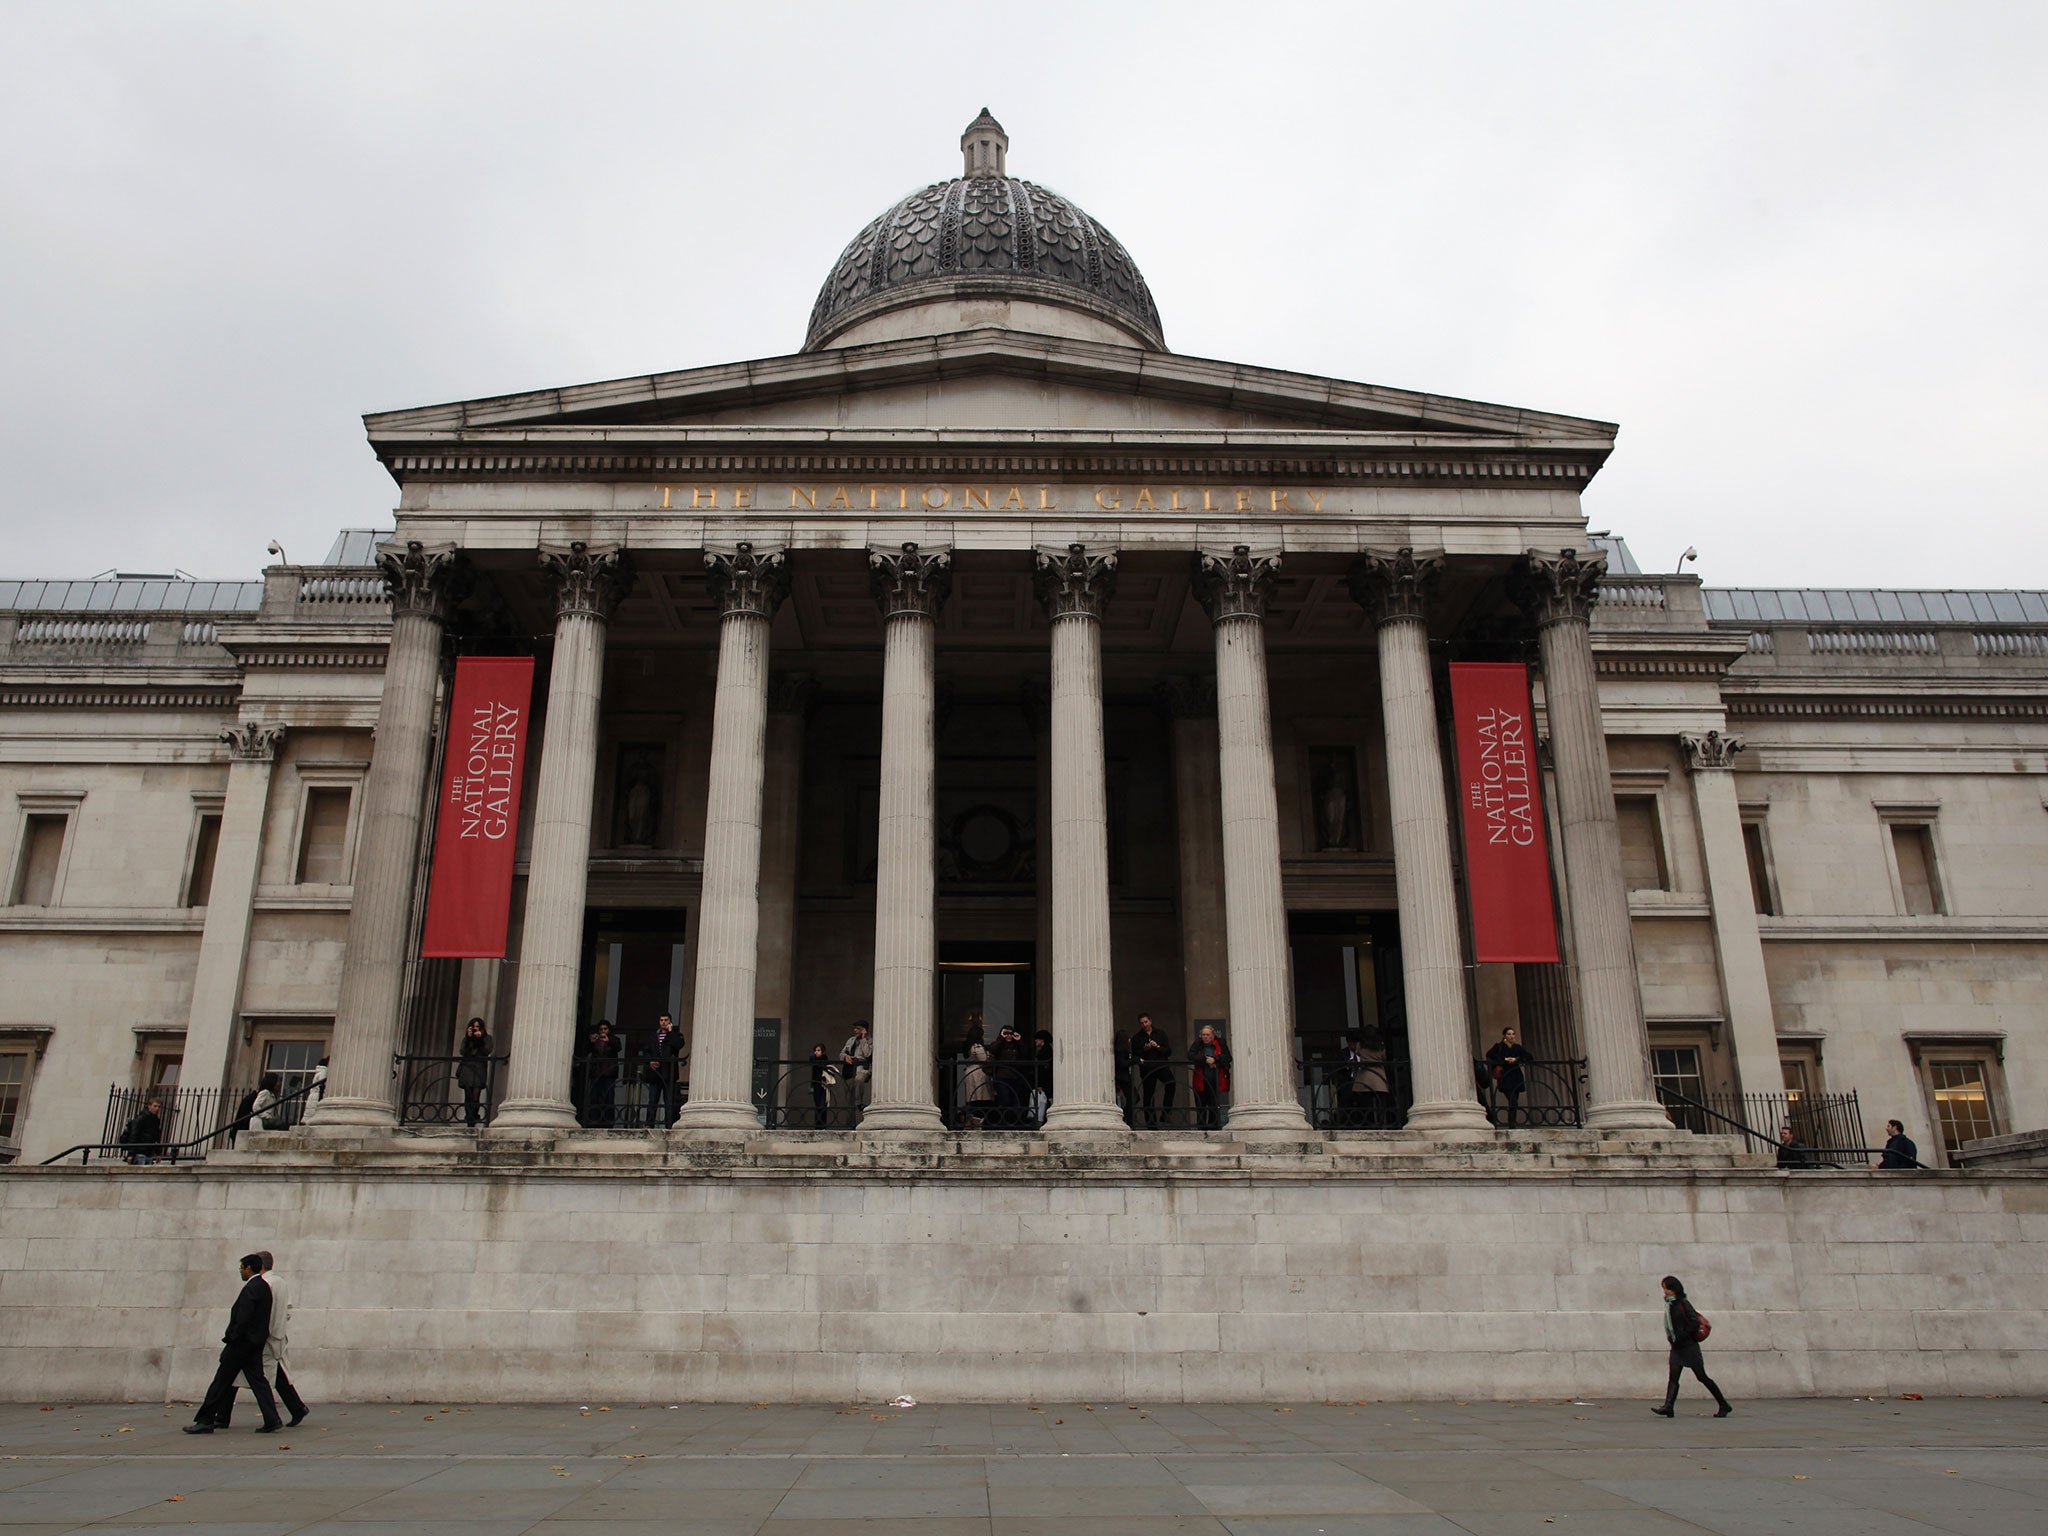 The National Gallery was founded in 1824. It has now decided to start a membership scheme because of the need to fill financial holes left by Government cuts